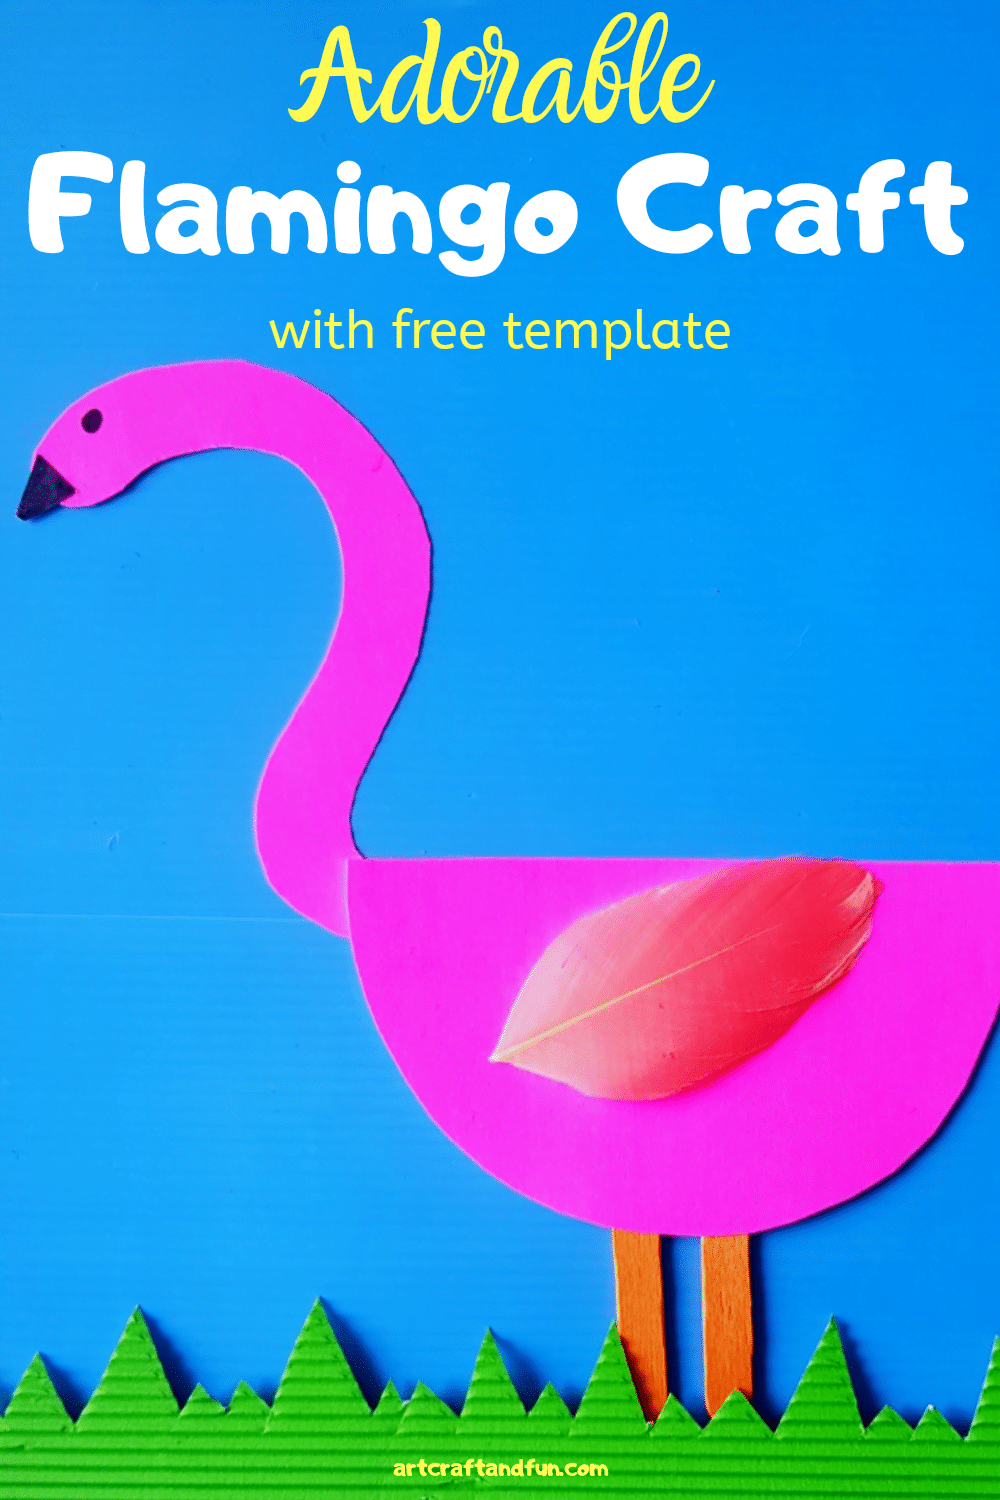 Adorable Flamingo Craft With Free Template